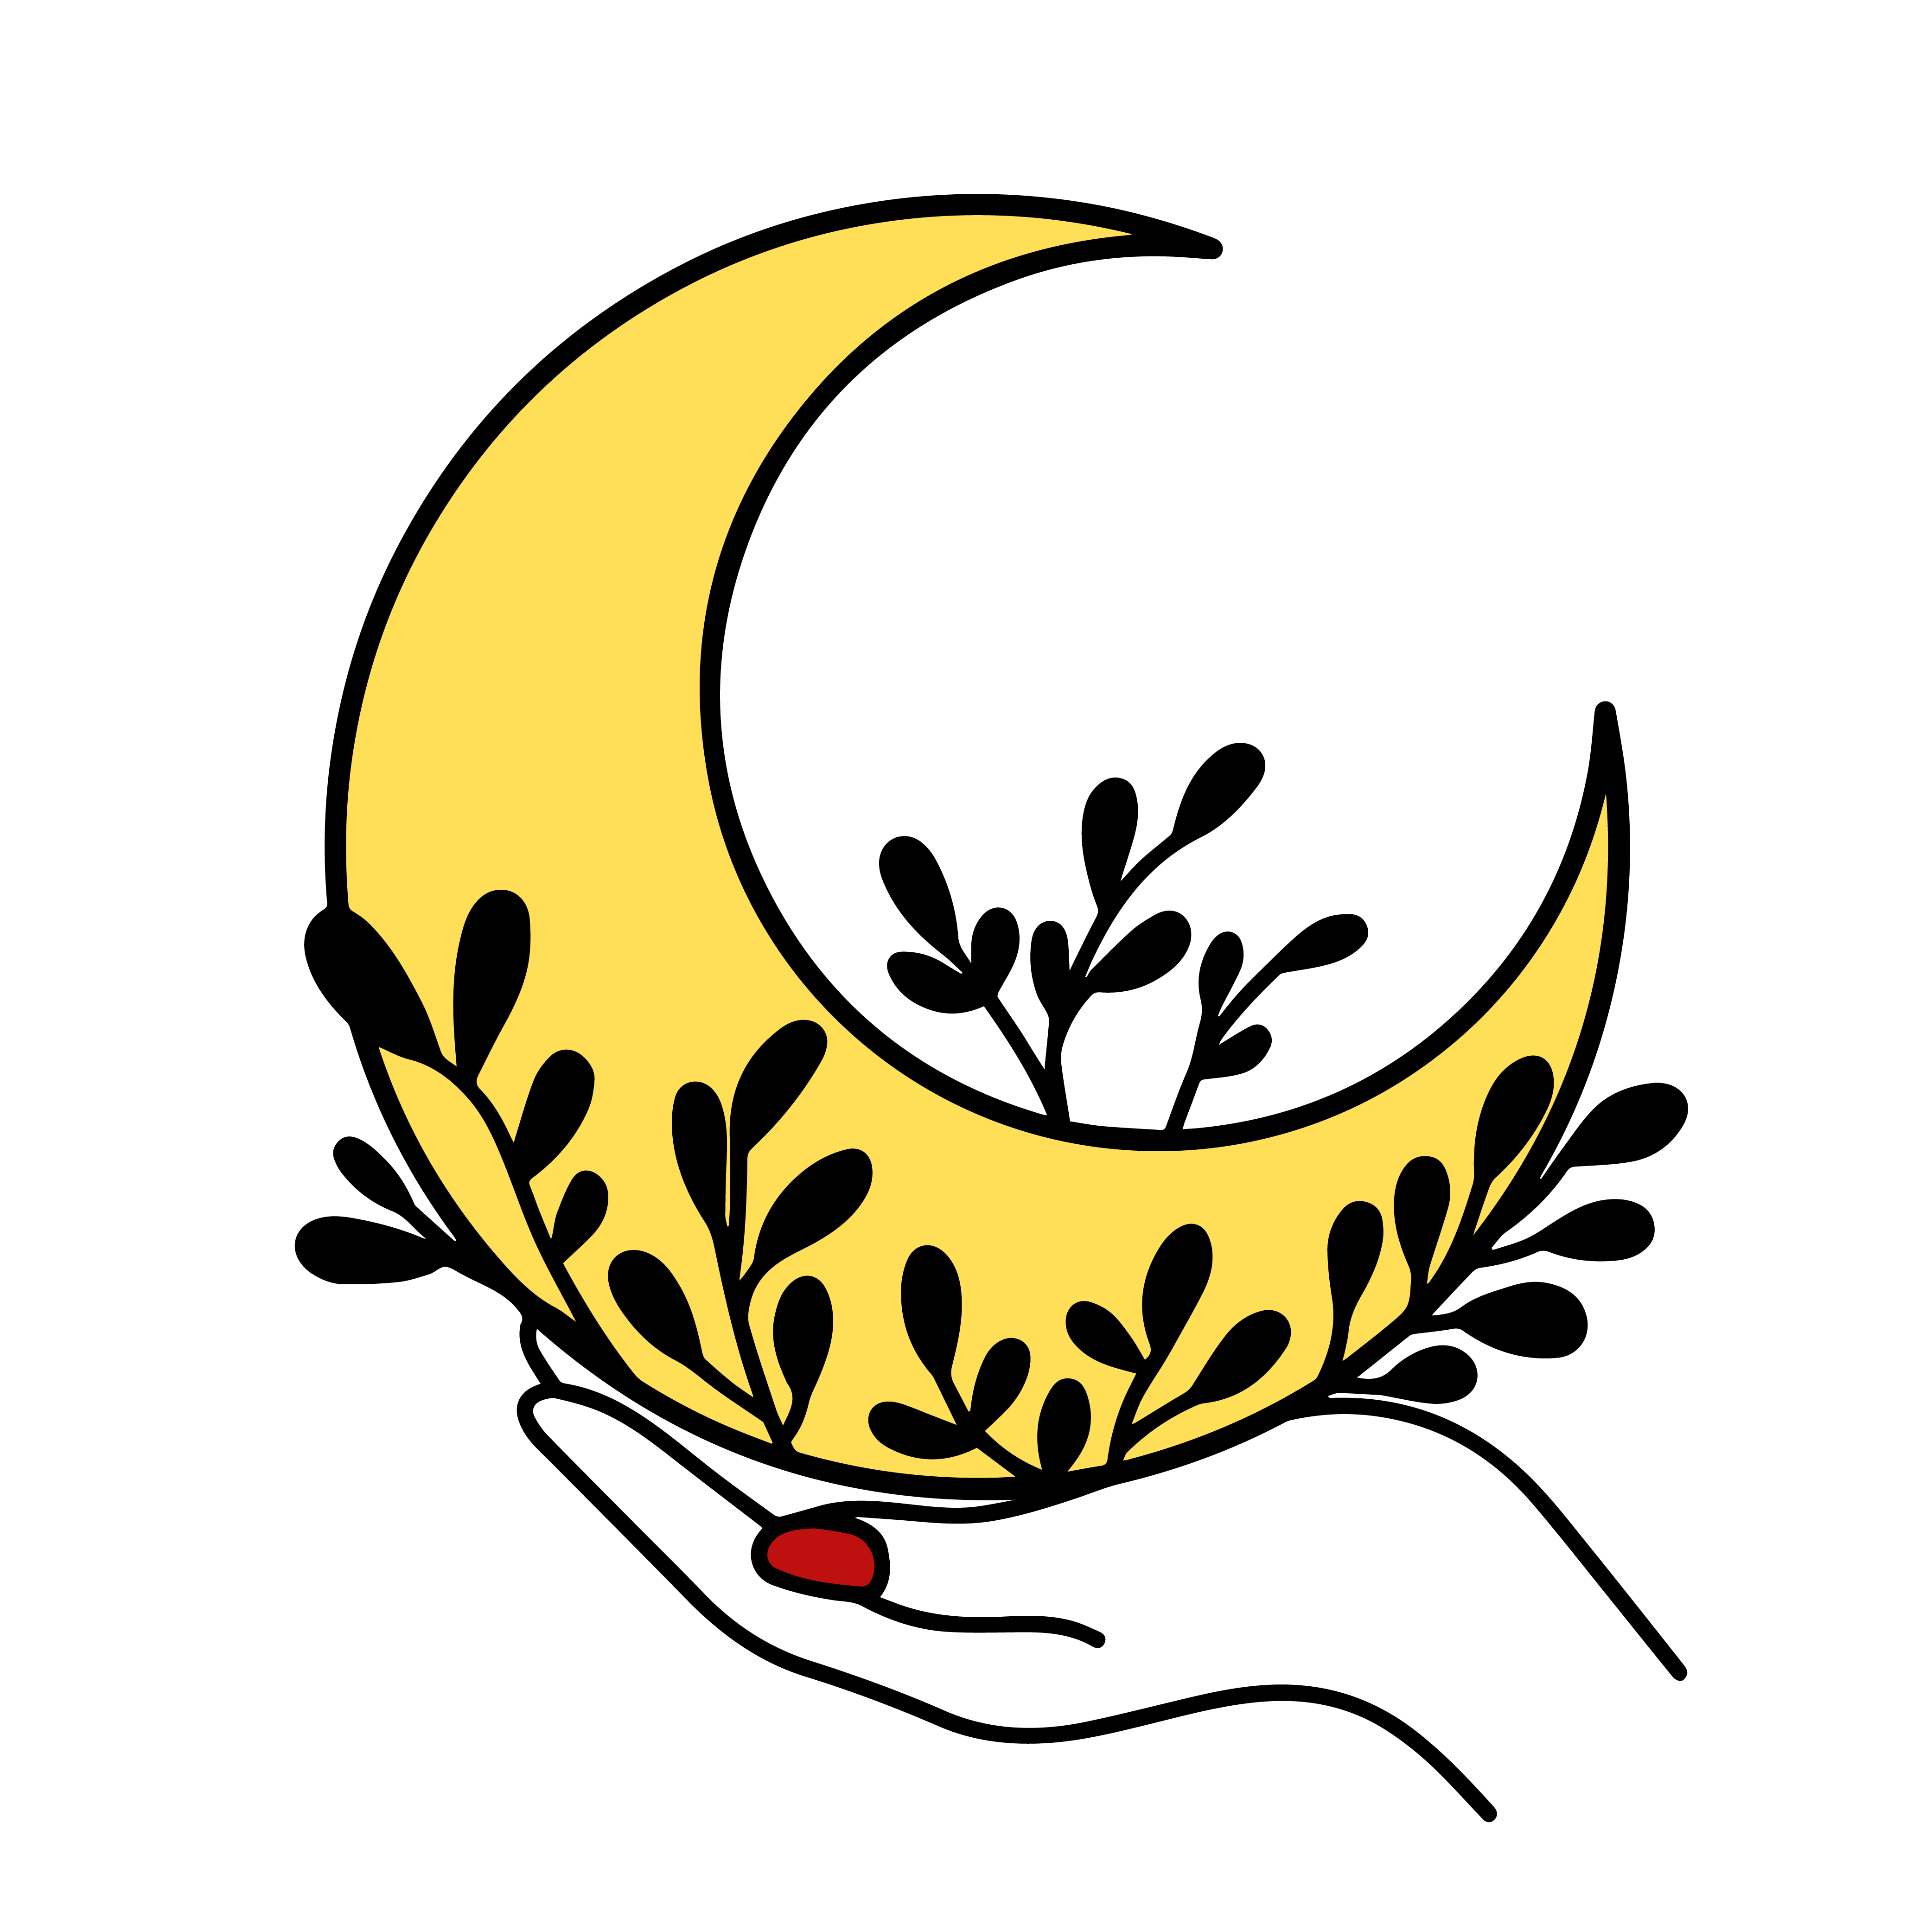 Moon In Hand - Design ( SVG - PNG - JPG - EPS ) Included preview image.